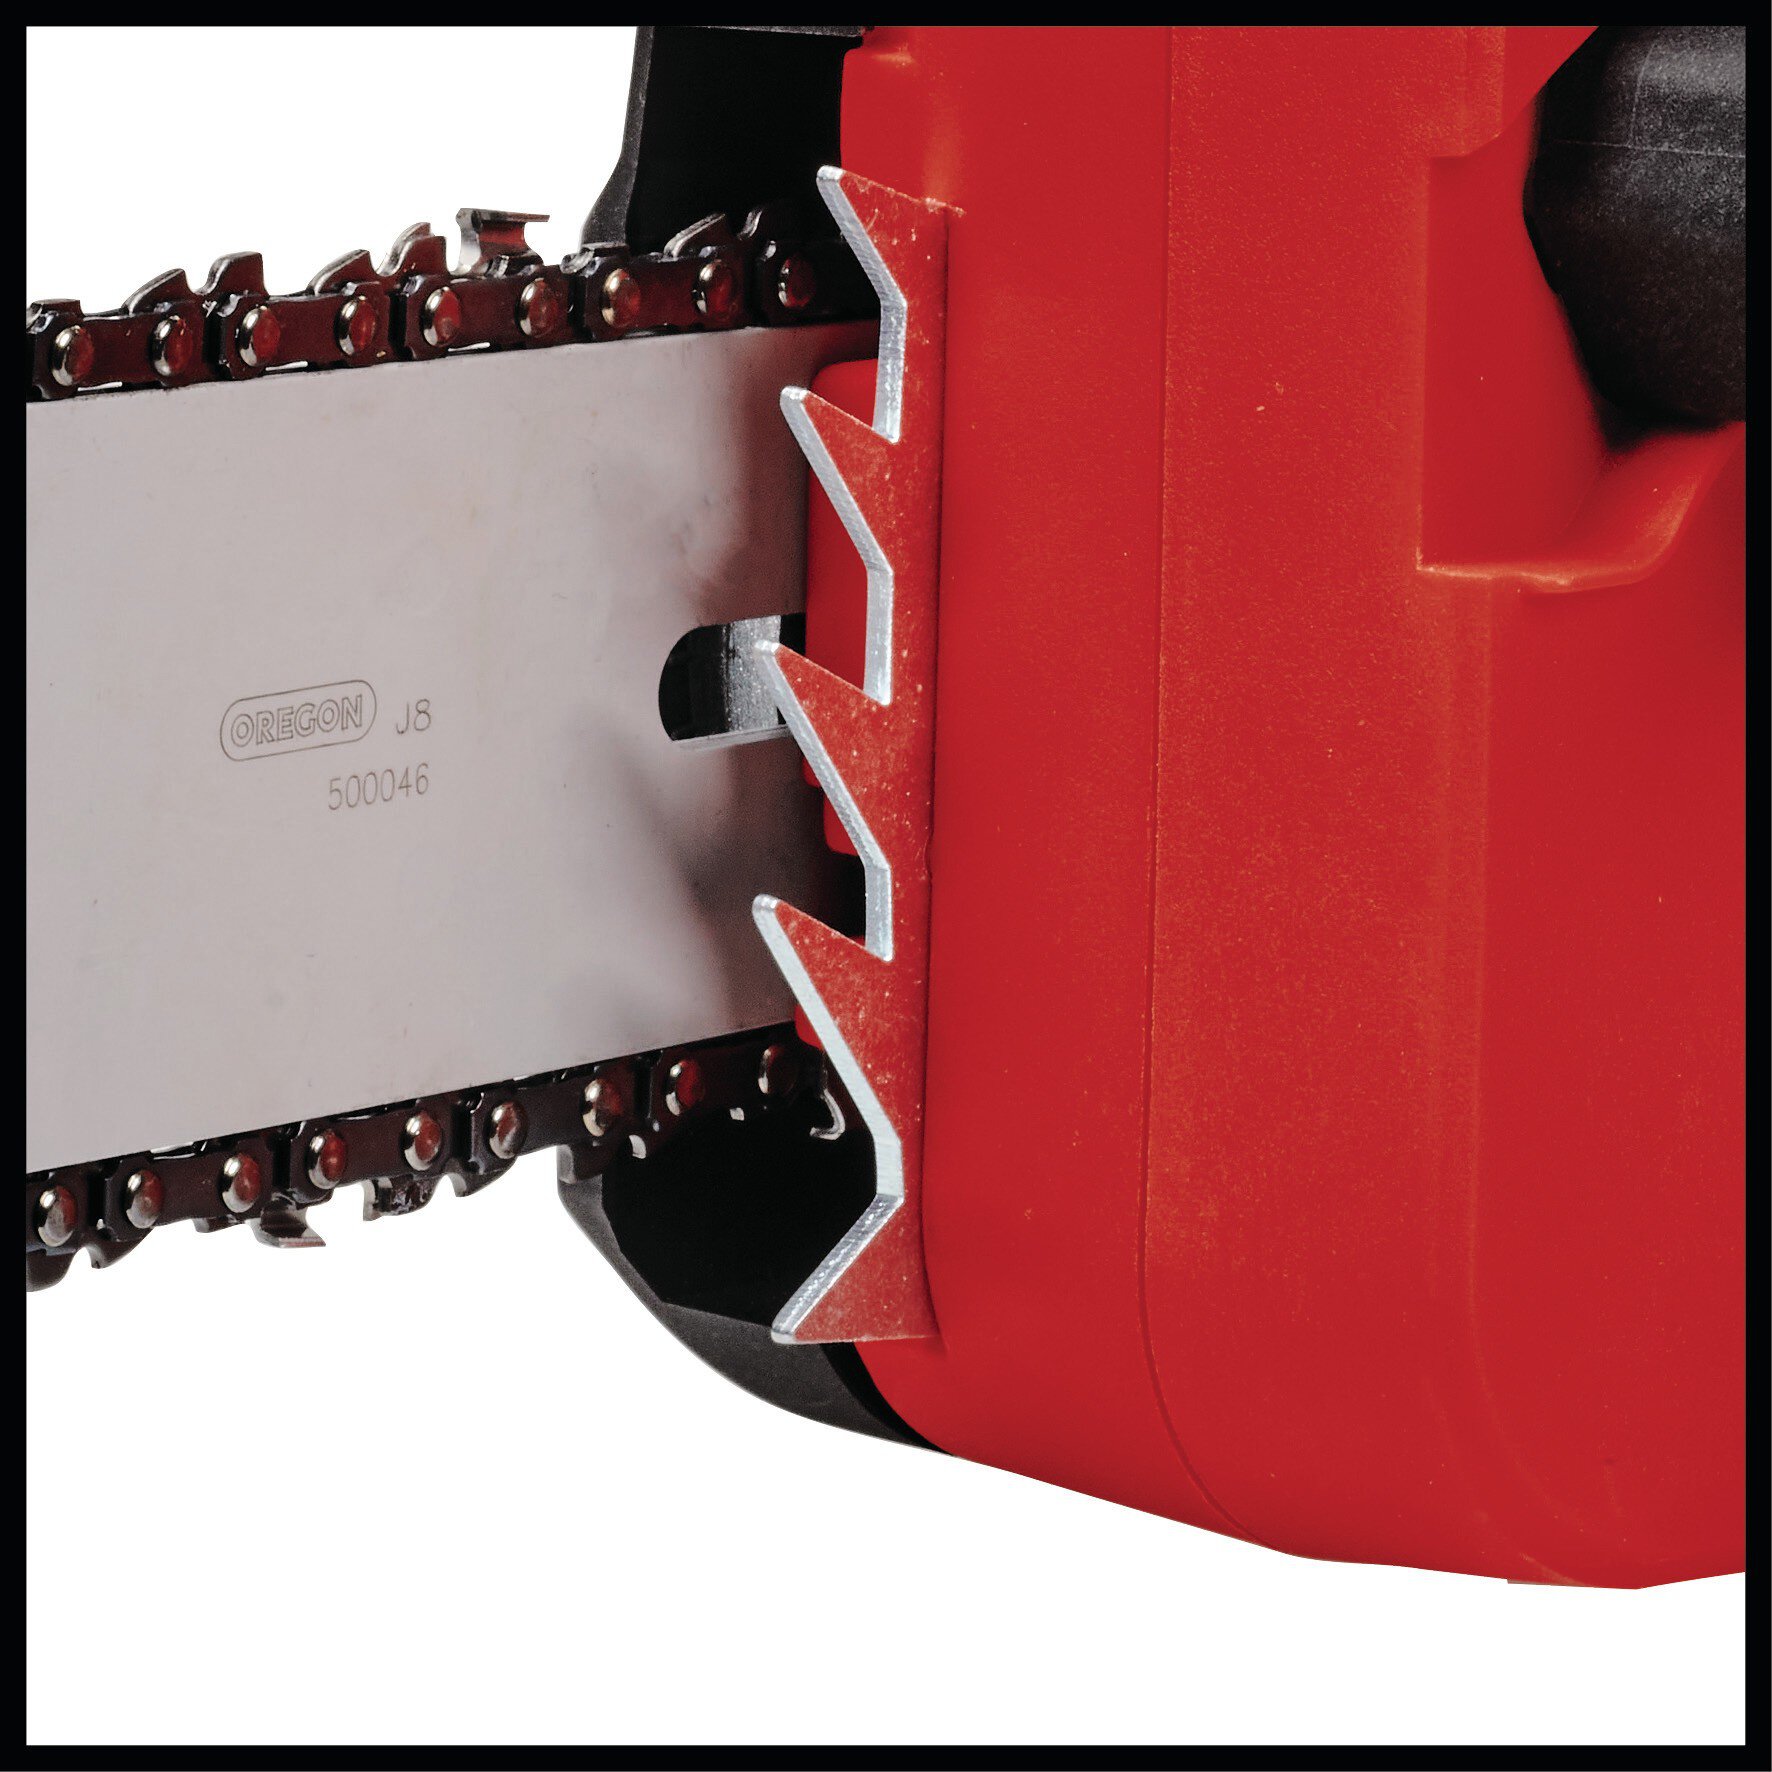 einhell-classic-electric-chain-saw-4501230-detail_image-106